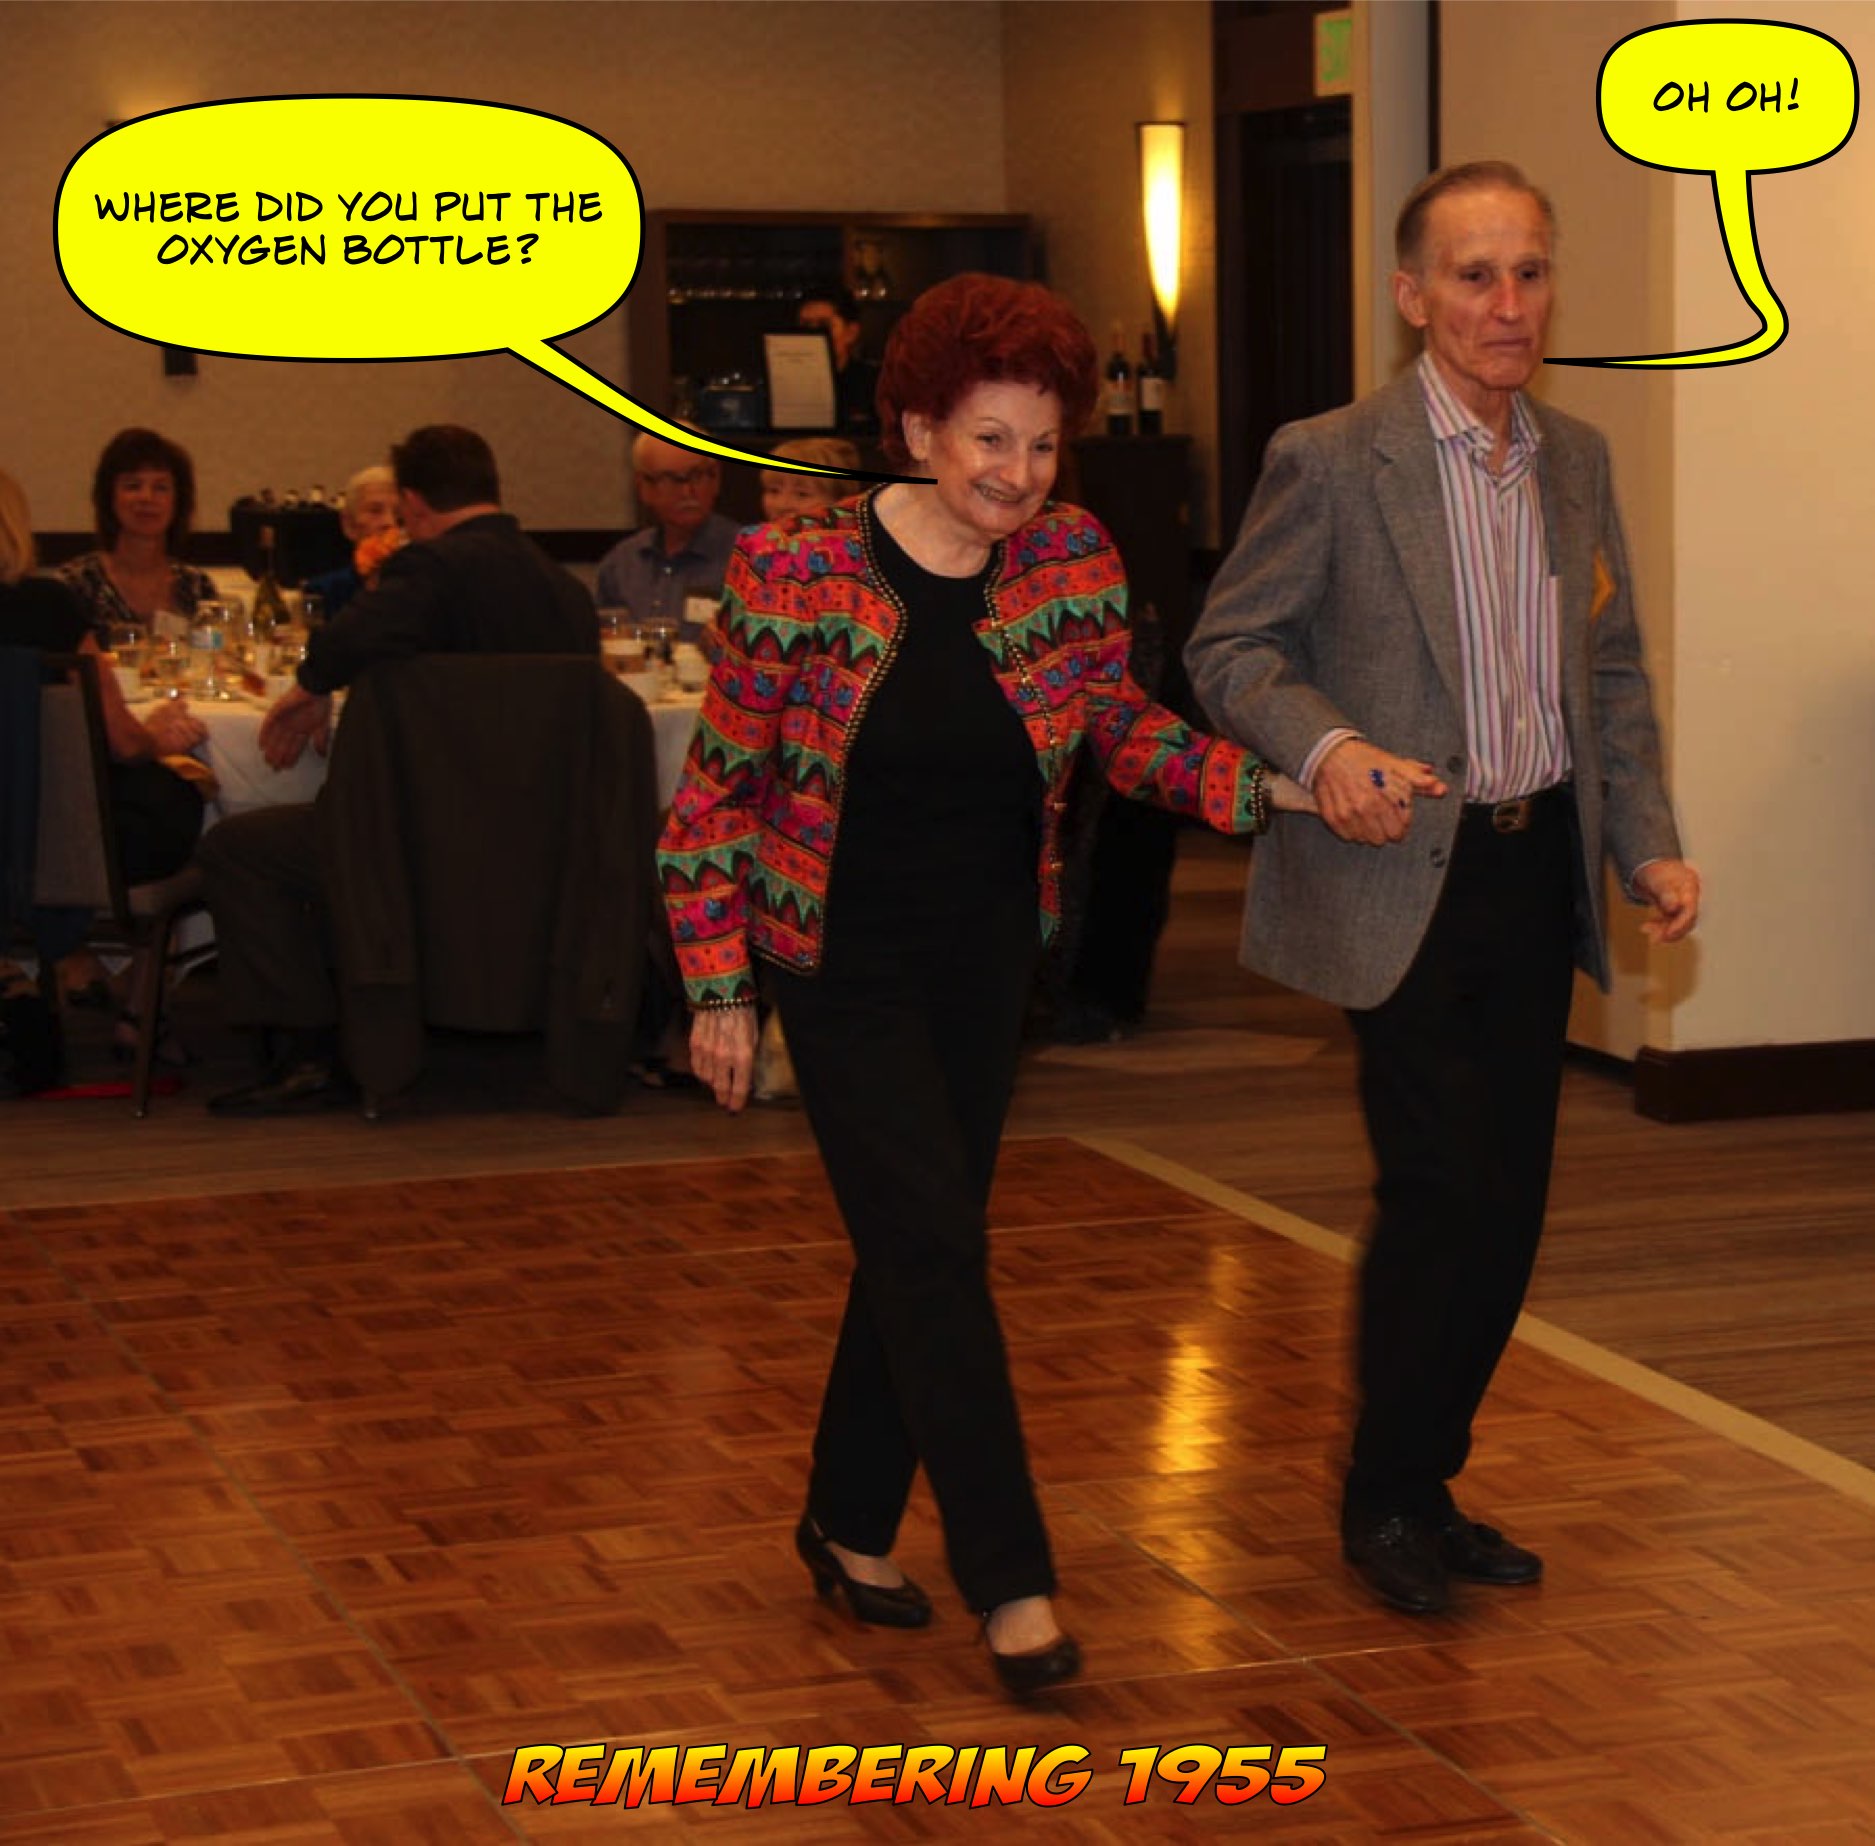 Dancing the night away with the Starlighters Winter Casual at the Marriott in Fullerton with Liz Holmes Retro Swing Band